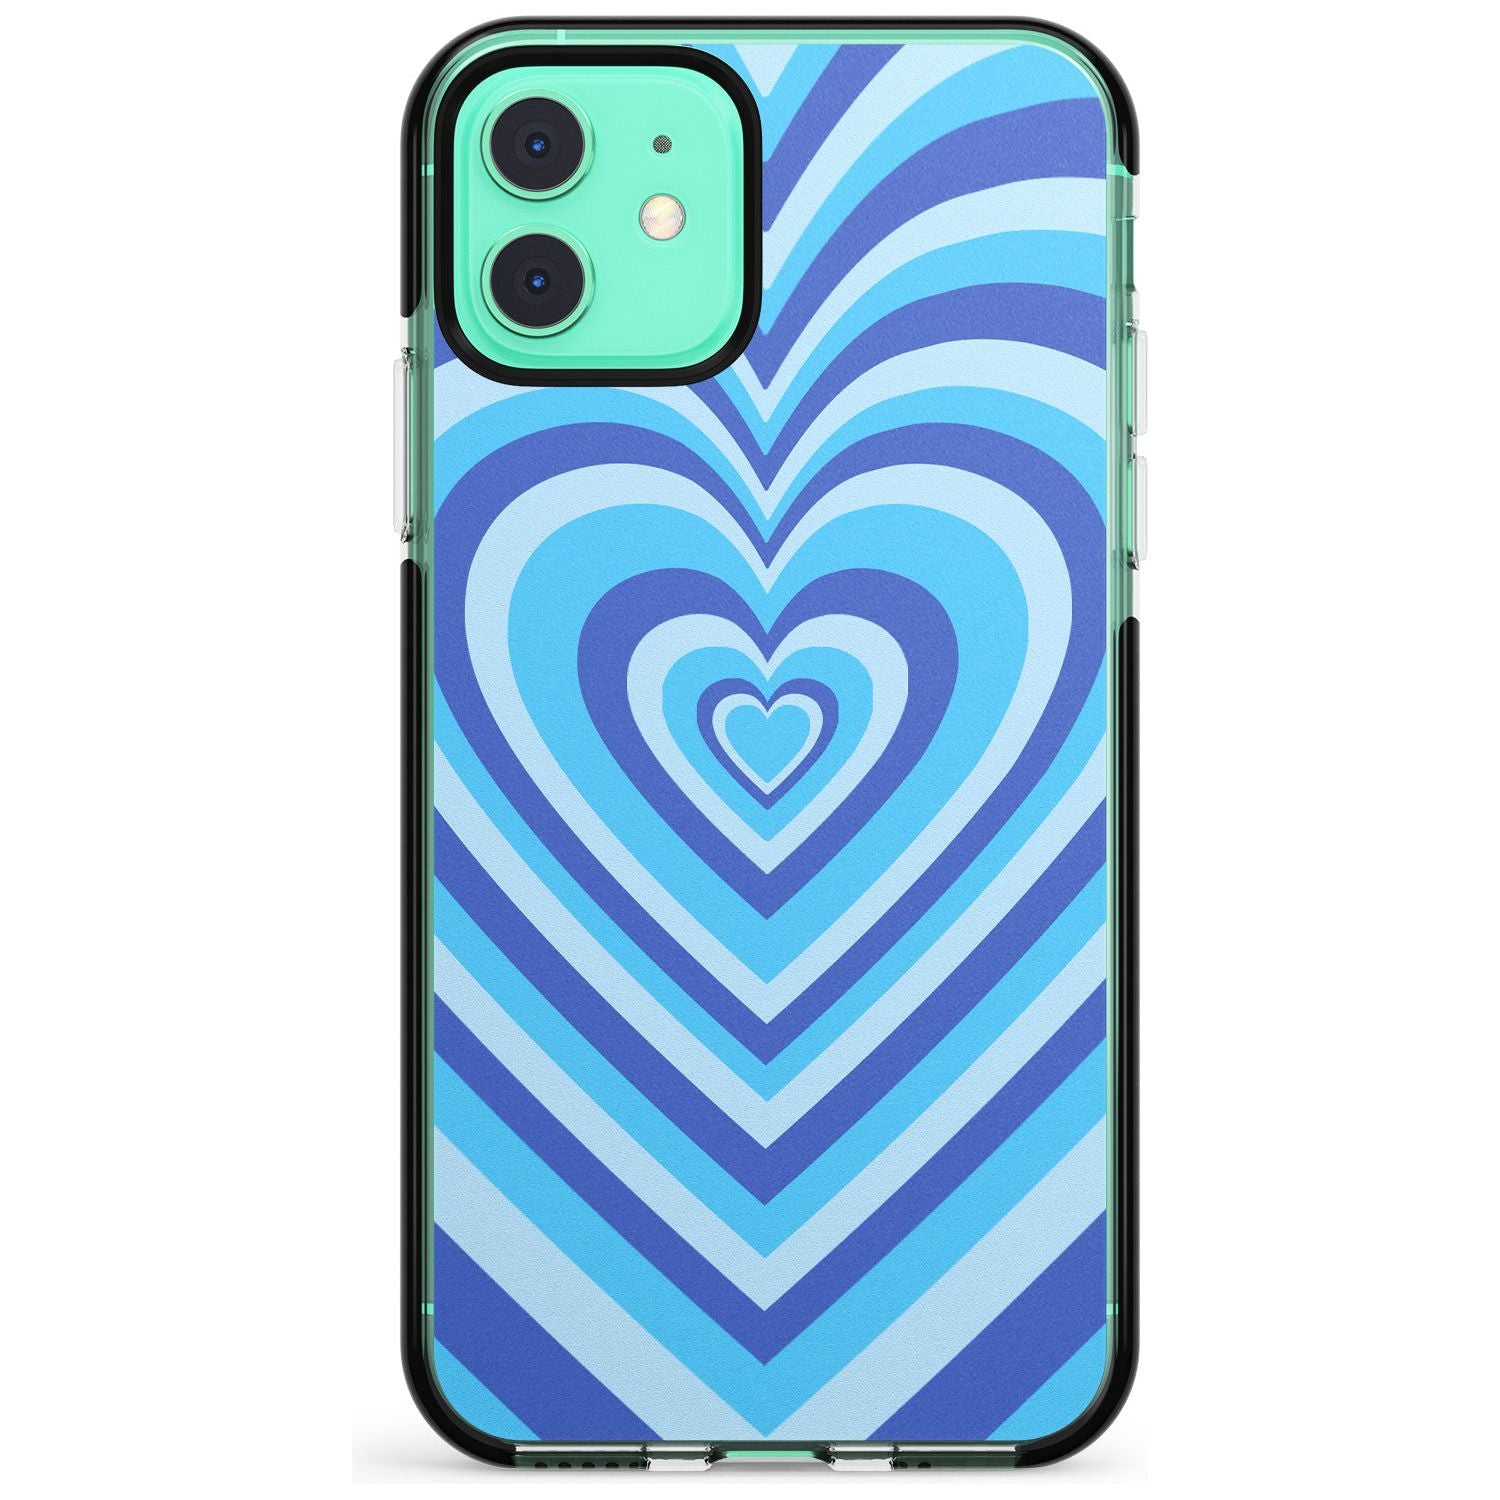 Blue Heart Illusion Black Impact Phone Case for iPhone 11 Pro Max